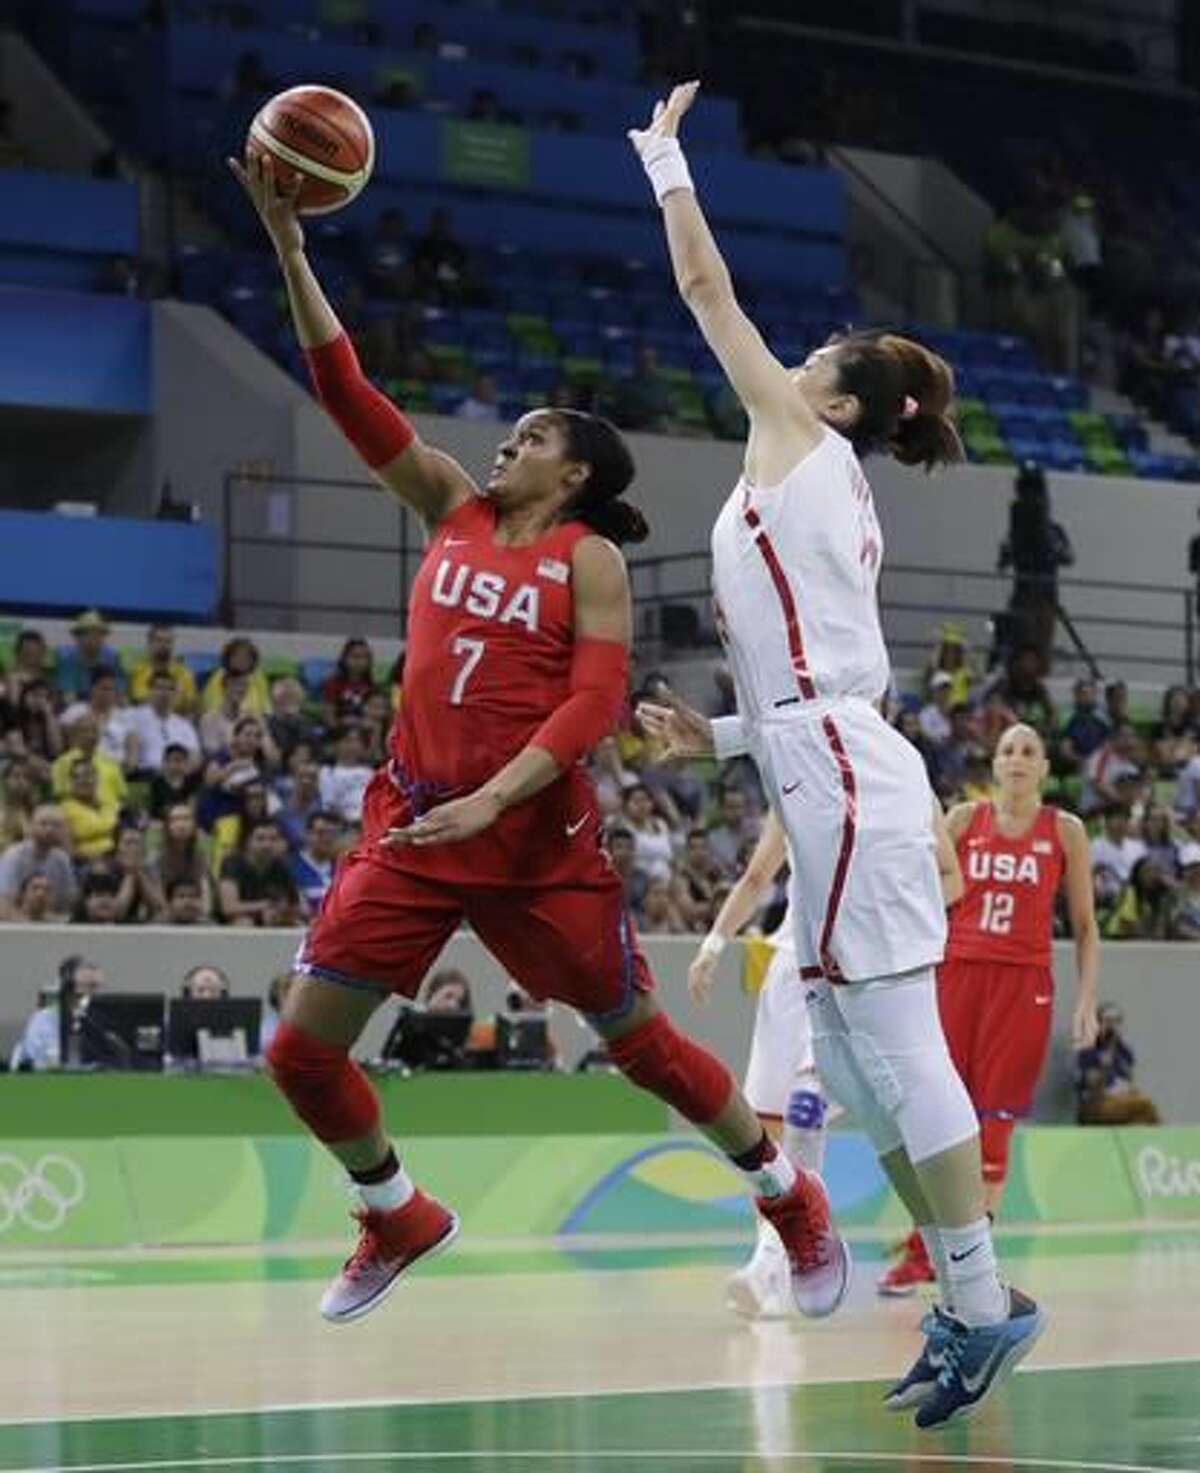 United States forward Maya Moore (7) makes a layup defended by China center Mengran Sun during the first half of a women's basketball game at the Youth Center at the 2016 Summer Olympics in Rio de Janeiro, Brazil, Sunday, Aug. 14, 2016. (AP Photo/Carlos Osorio)